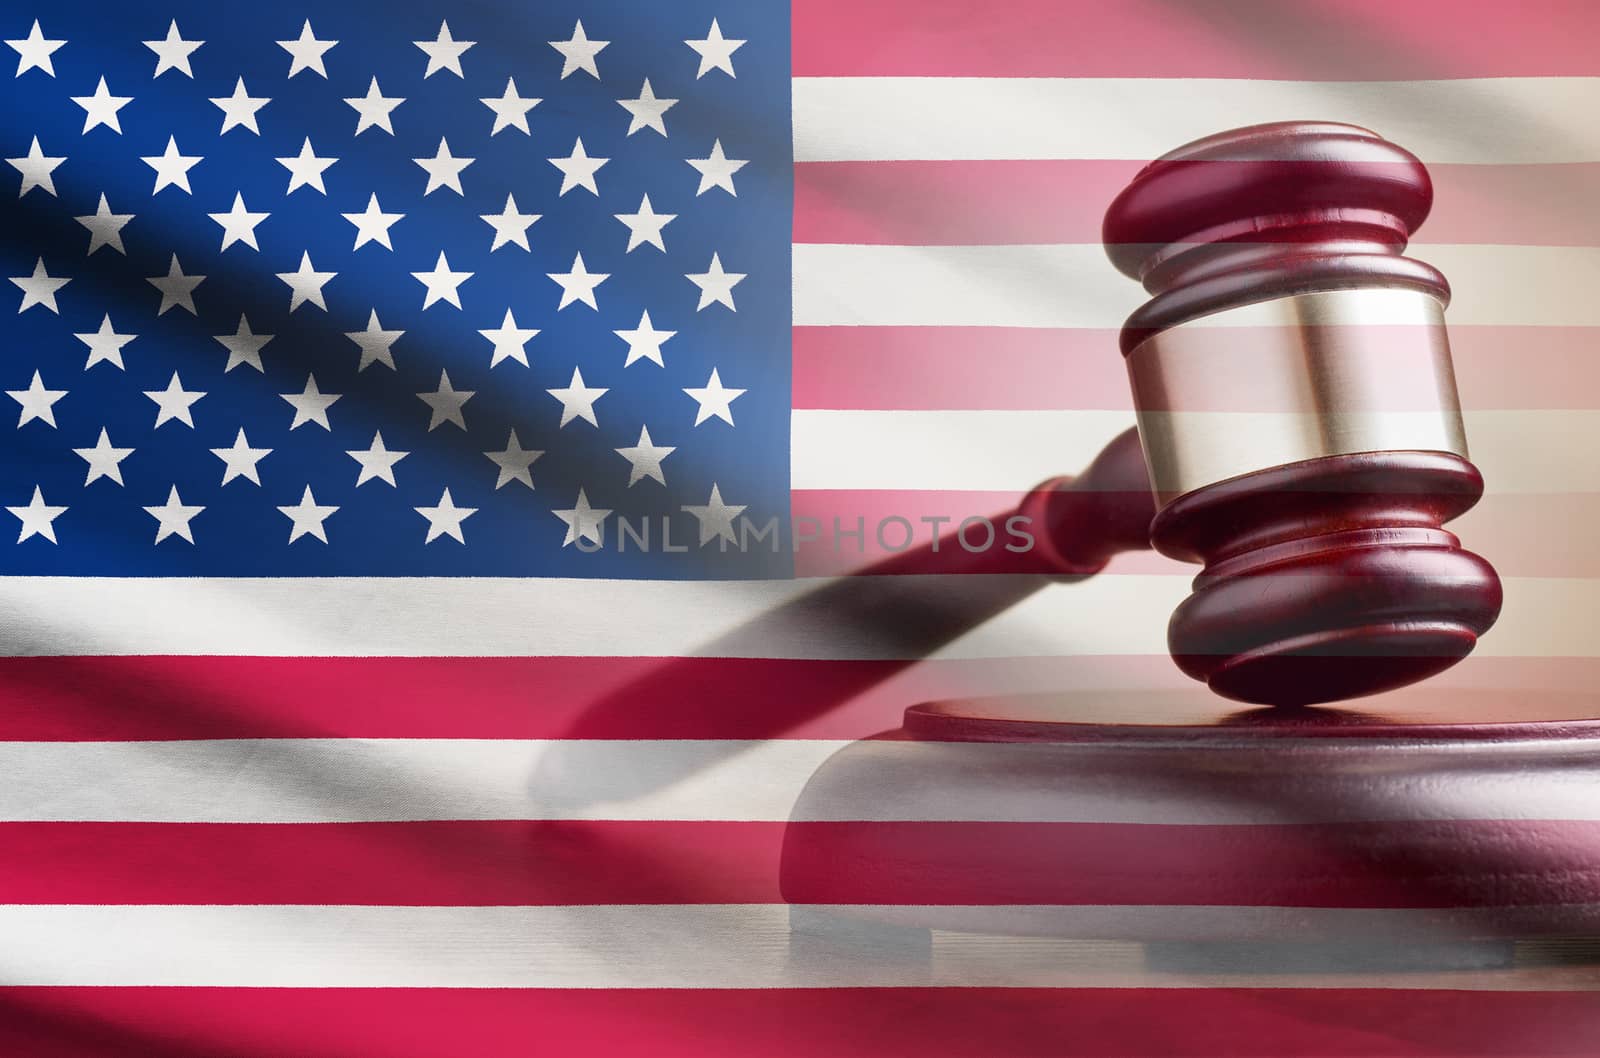 Legal gavel over a flag of the USA by sergii_gnatiuk